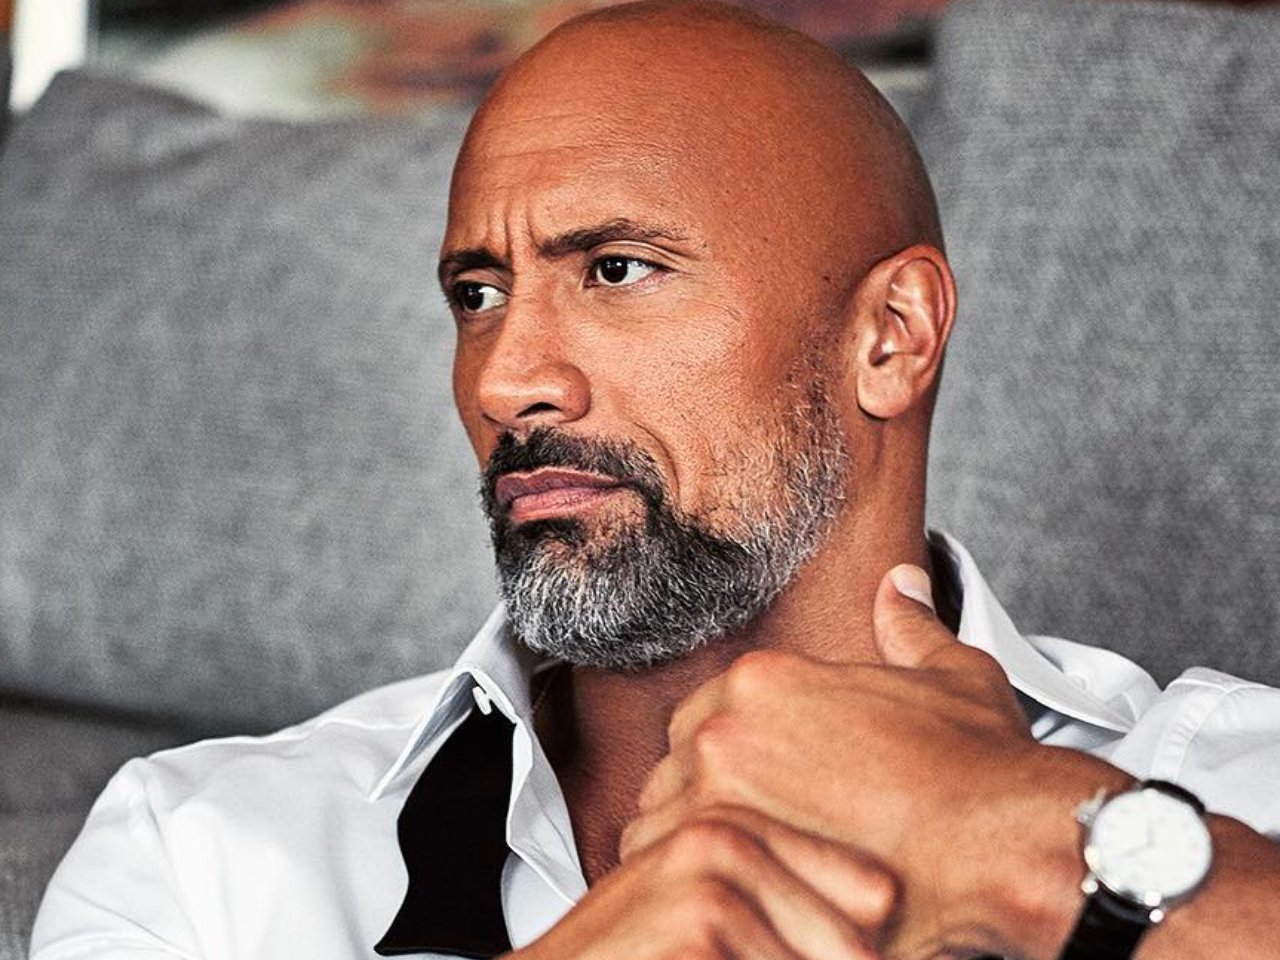 Dwayne The Rock Johnson. 10 interesting facts from life / Success story (11 photos + 2 videos) - Actors and actresses, Celebrities, Movies, Shock, Top, news, Interesting, Life stories, Video, Longpost